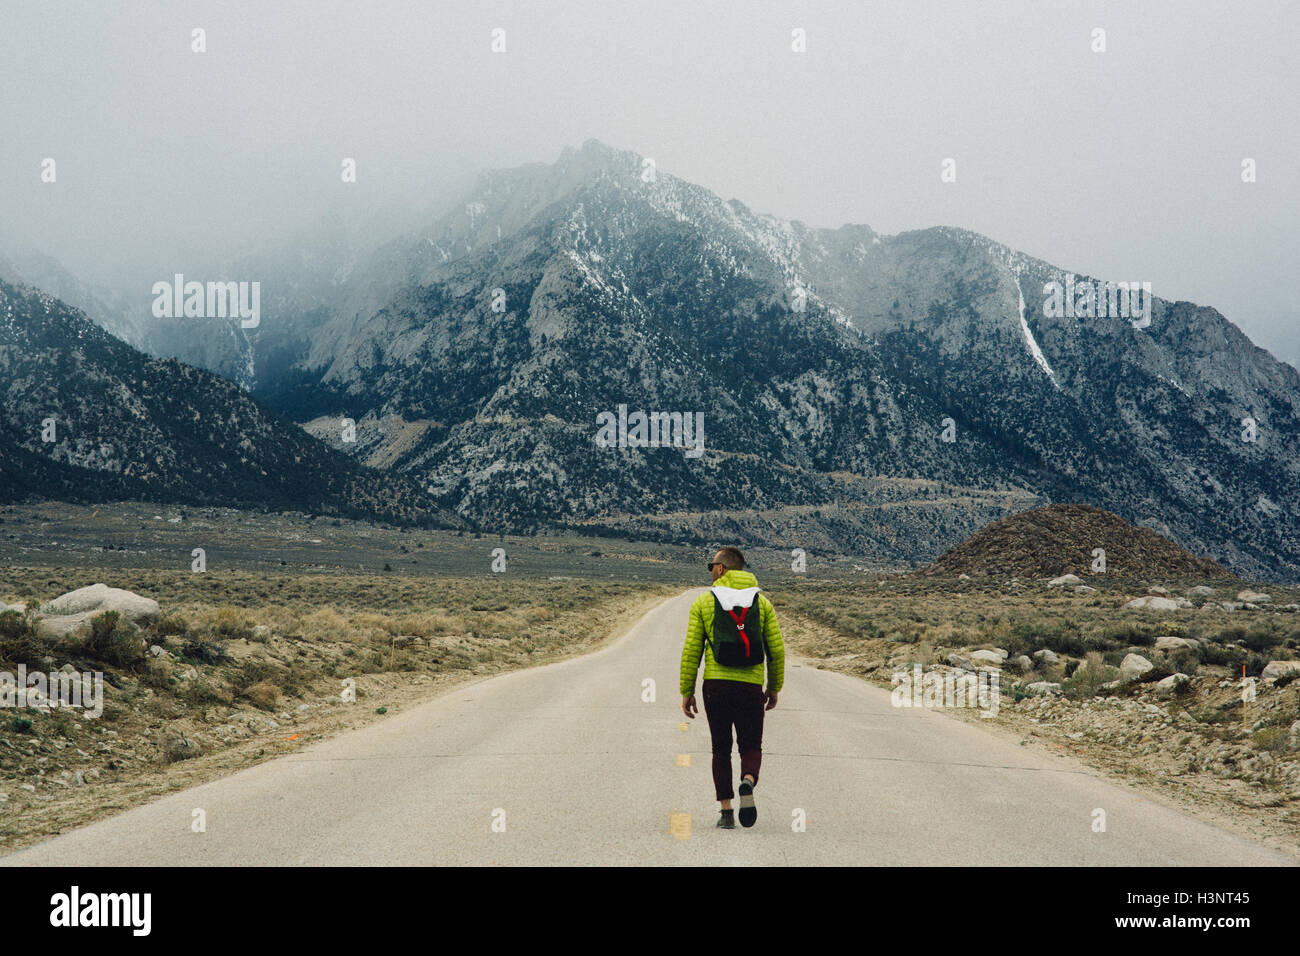 Rear view of hiker on road by mountains, Lone Pine, California, USA Stock Photo